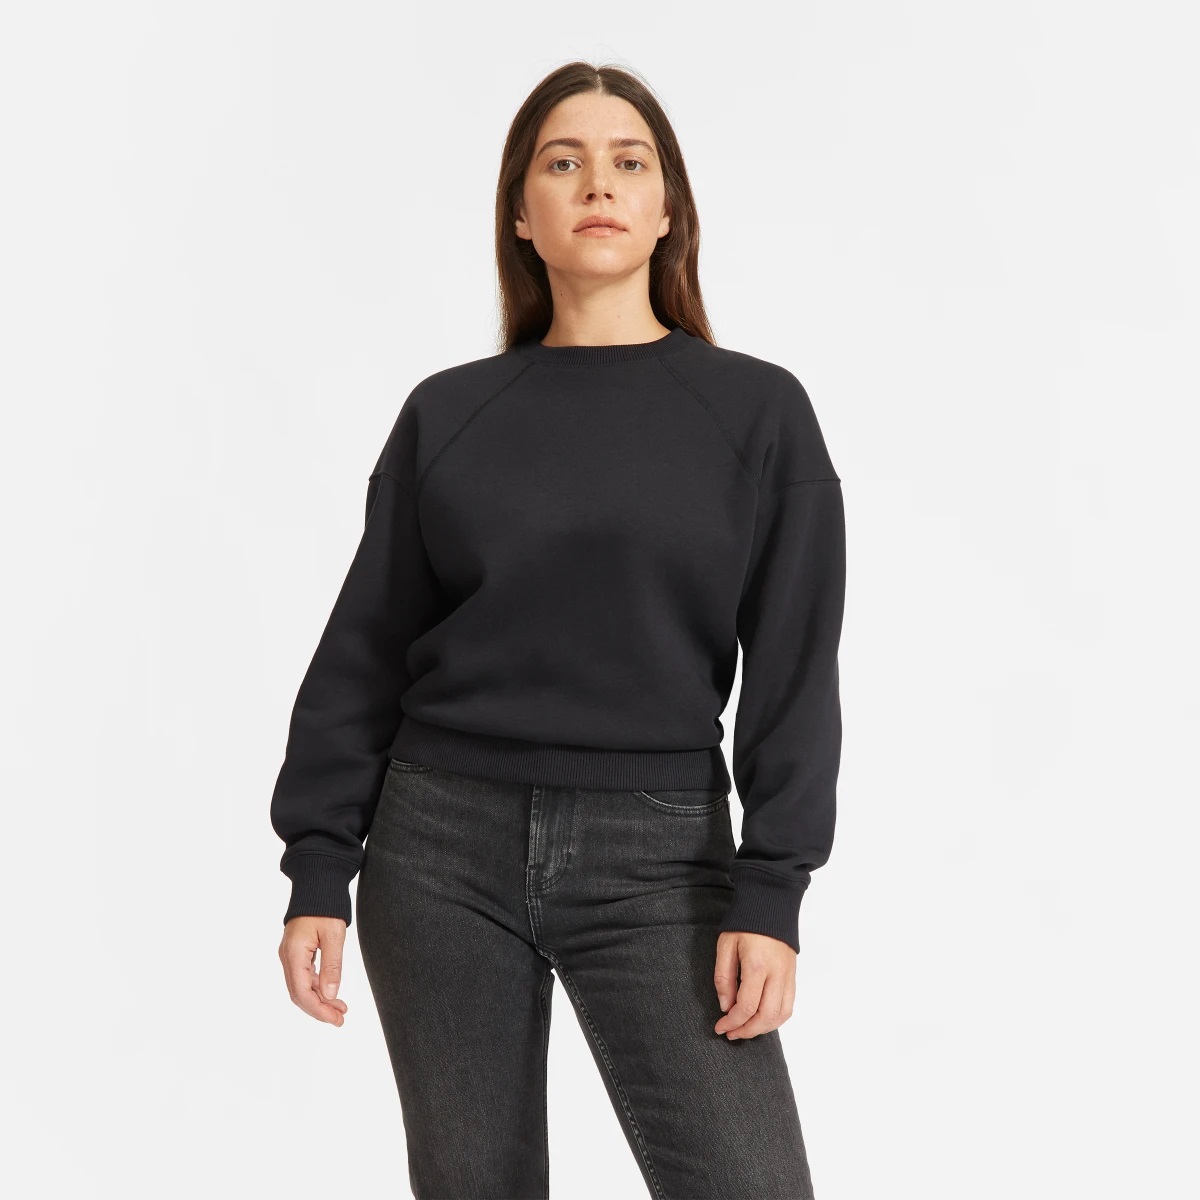 Everlane: Last Chance Items Up to 50% OFF